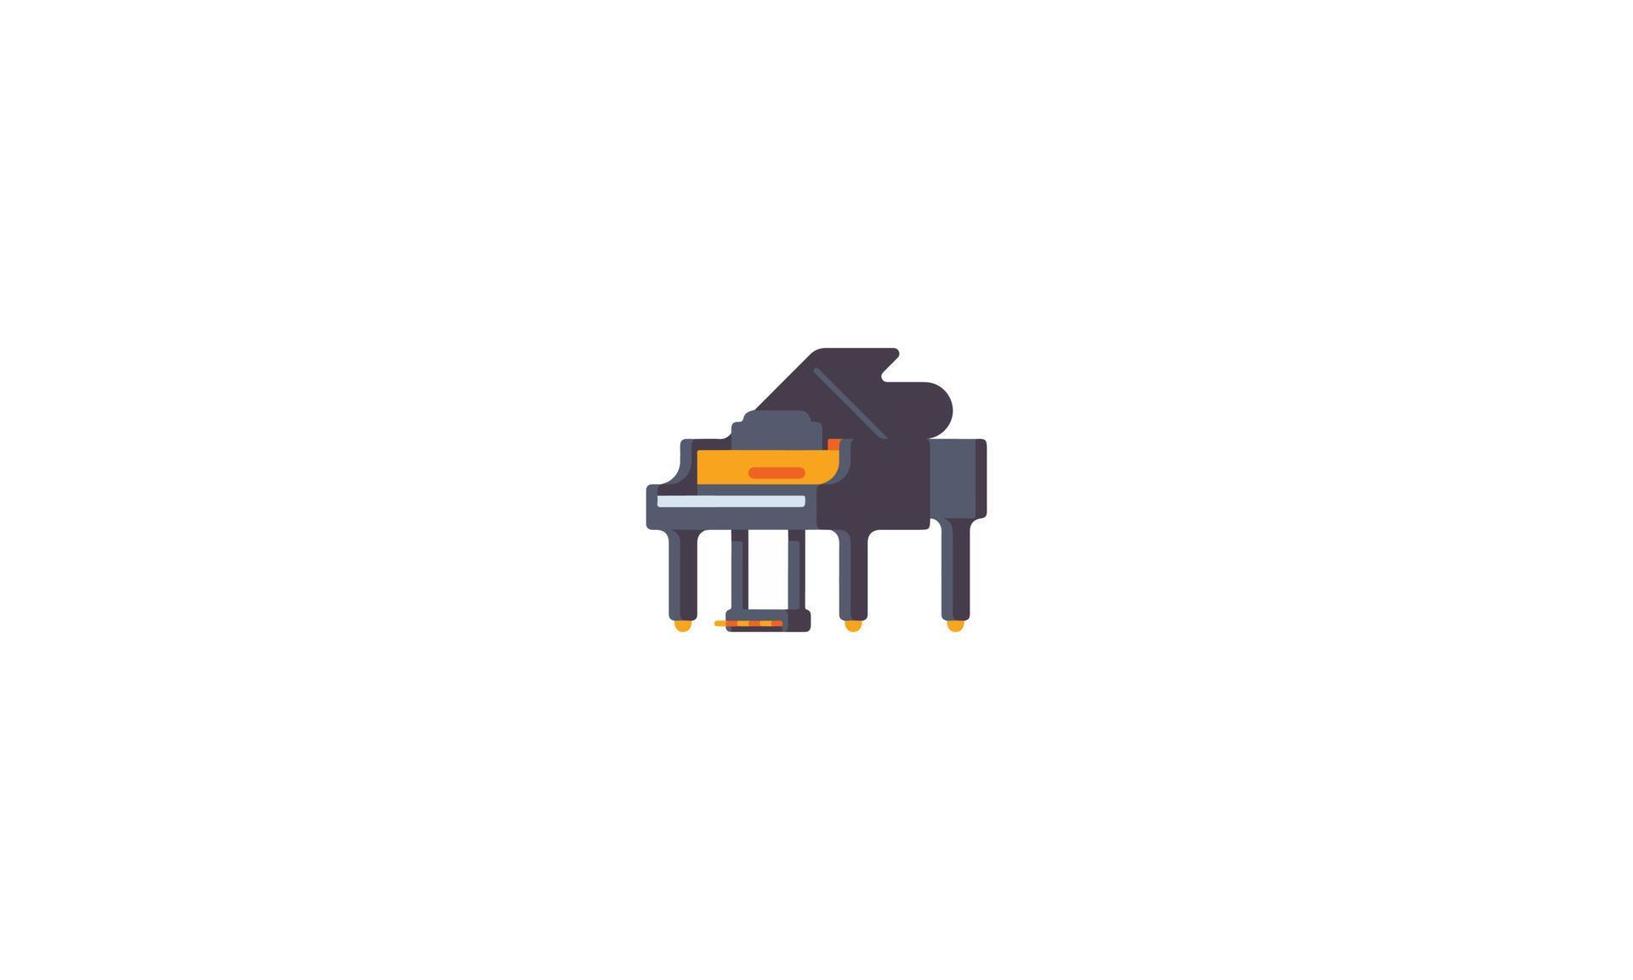 Grand piano logo template design in outline style Vector illustration.